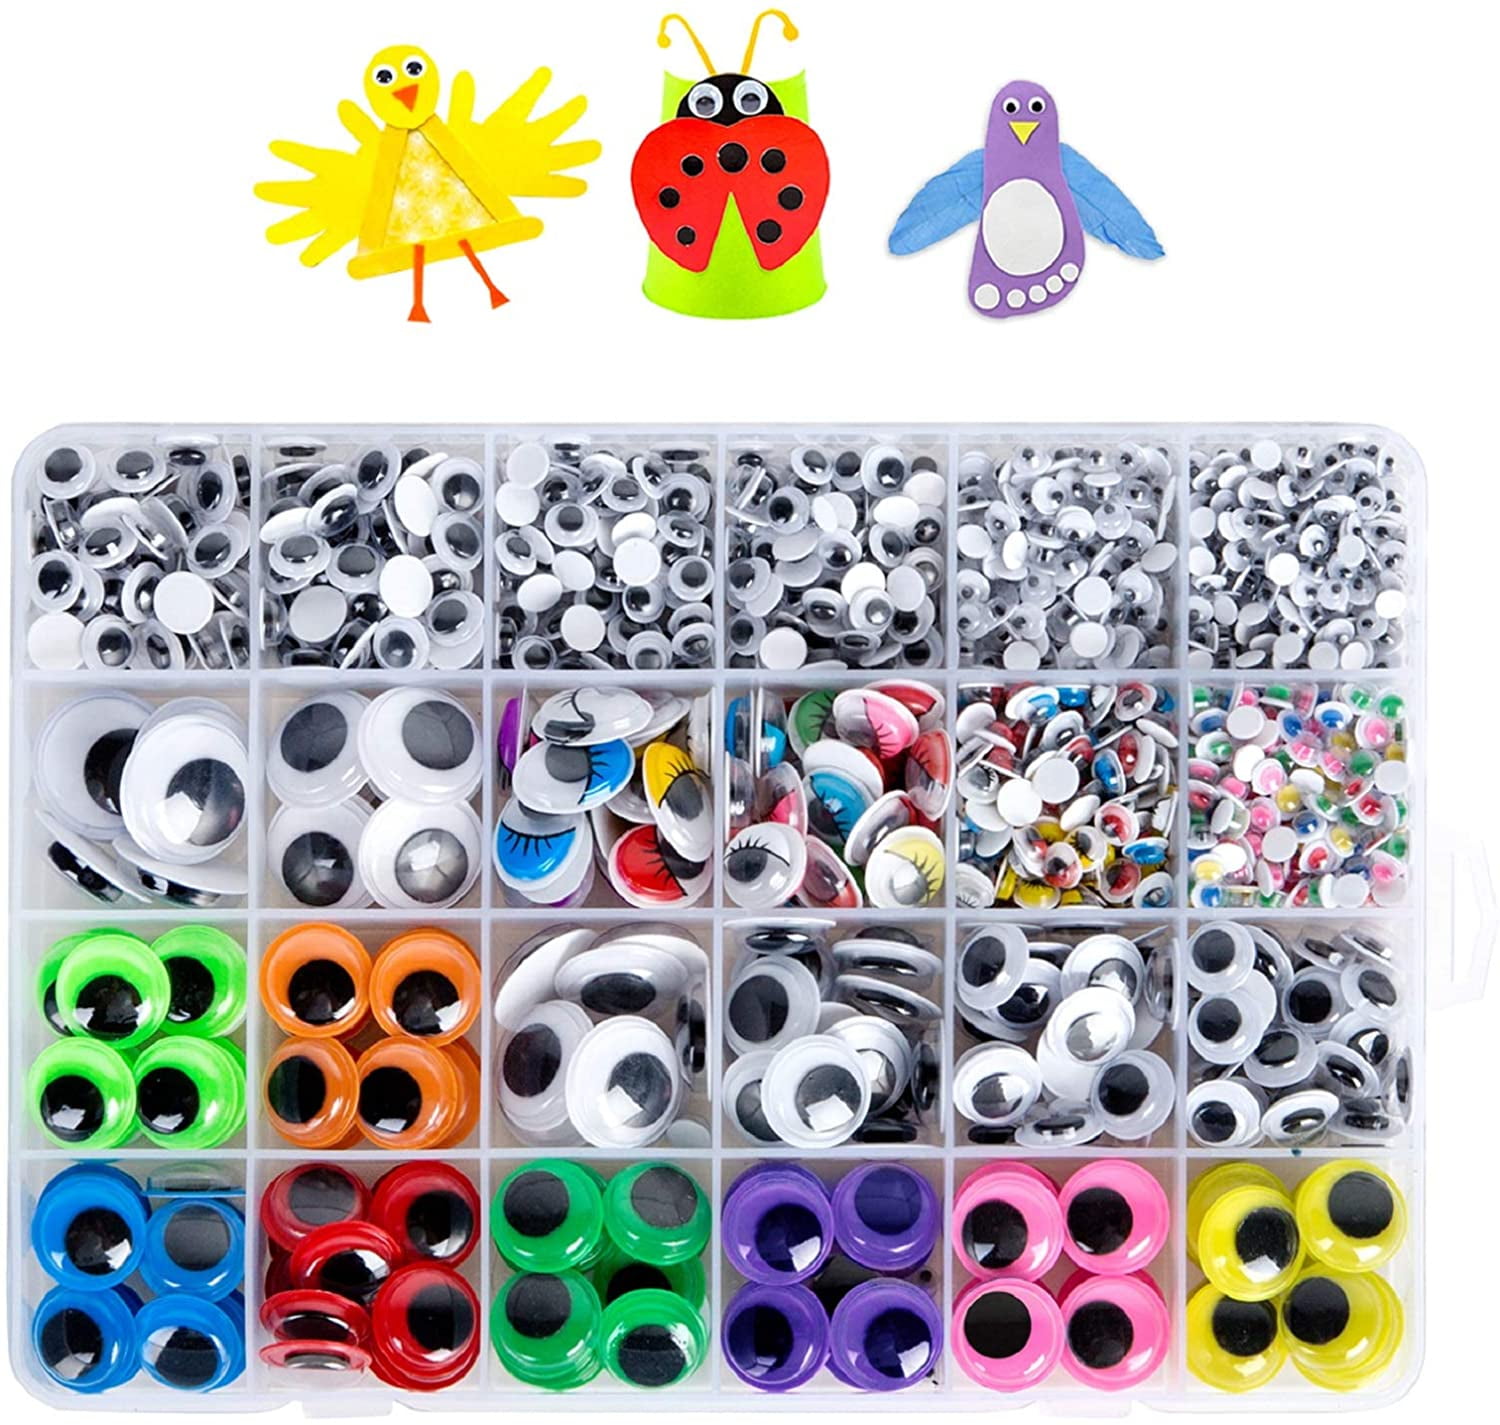 Festival Craft Doll Making Toys Eyes Elcoho 500 Pieces Wiggle Eyes Self Adhesive Googly Eyes for Christmas DIY Craft Scrapbooking 